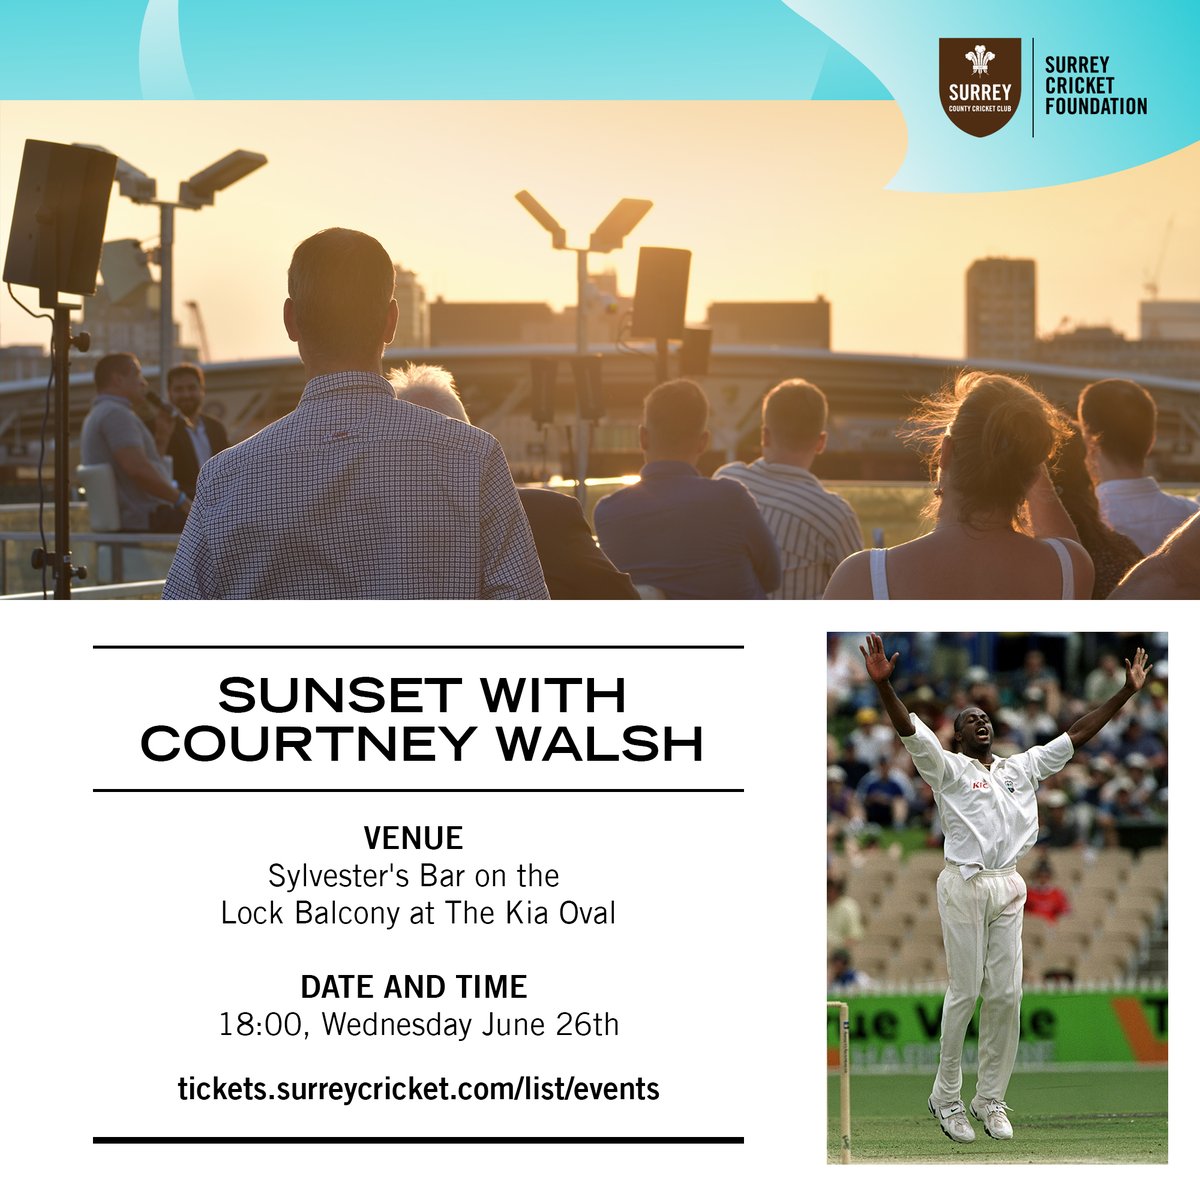 🌇Sunset with Courtney Walsh 🌇 Join us for an unforgettable evening with West Indian fast-bowling legend Courtney Walsh! Enjoy stunning views, reception drink, two course Caribbean street food menu, & an exclusive Q&A. 🎟️ Get your tickets now: tickets.surreycricket.com/selection/even…